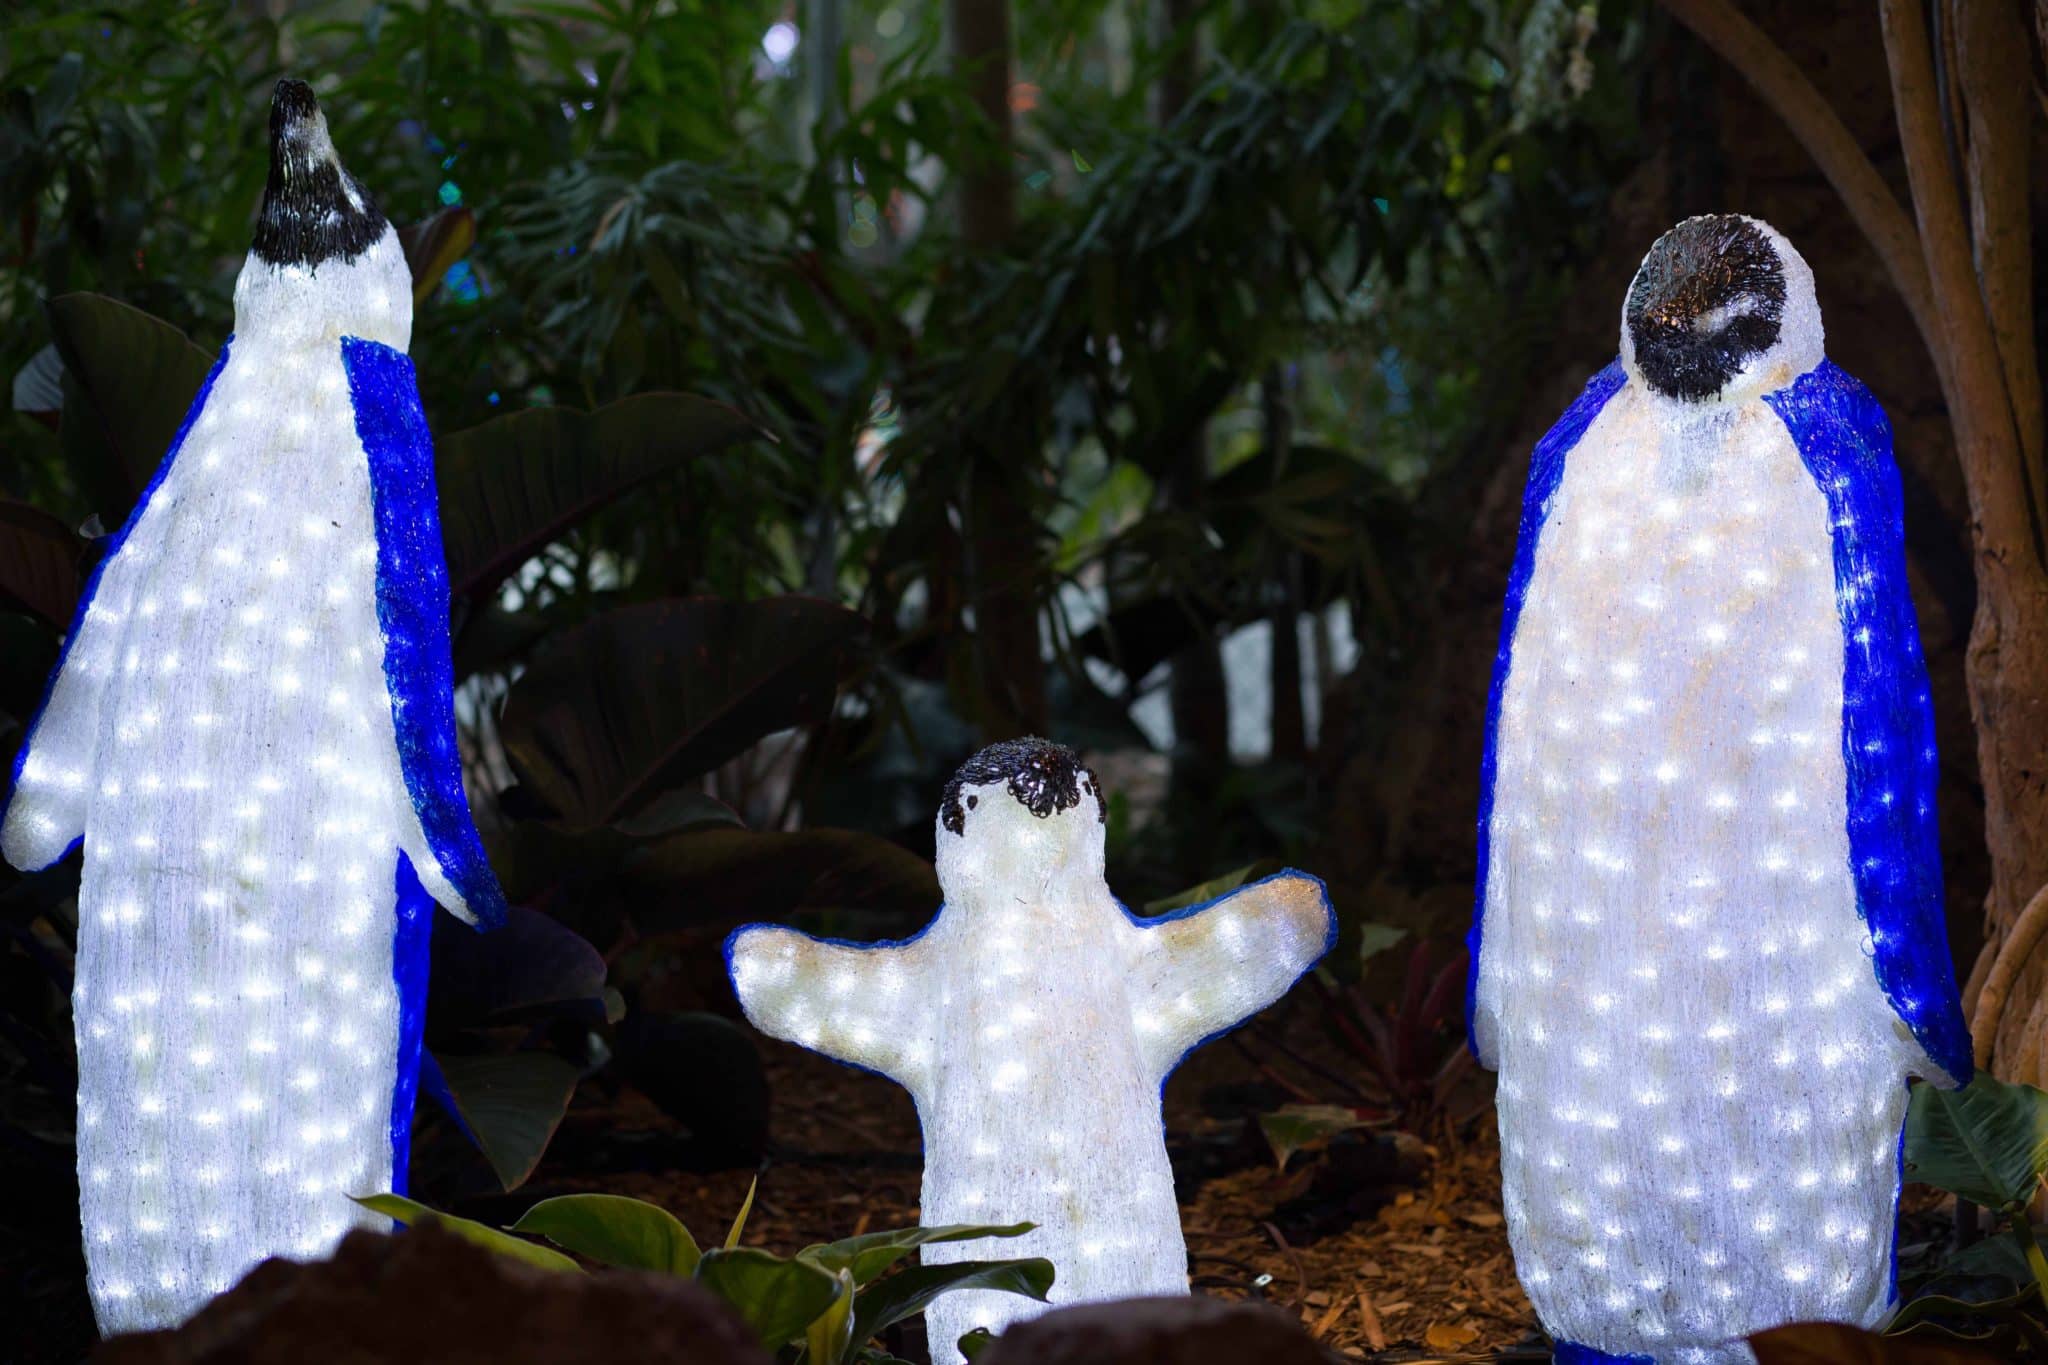 Lit up penguins for the holidays